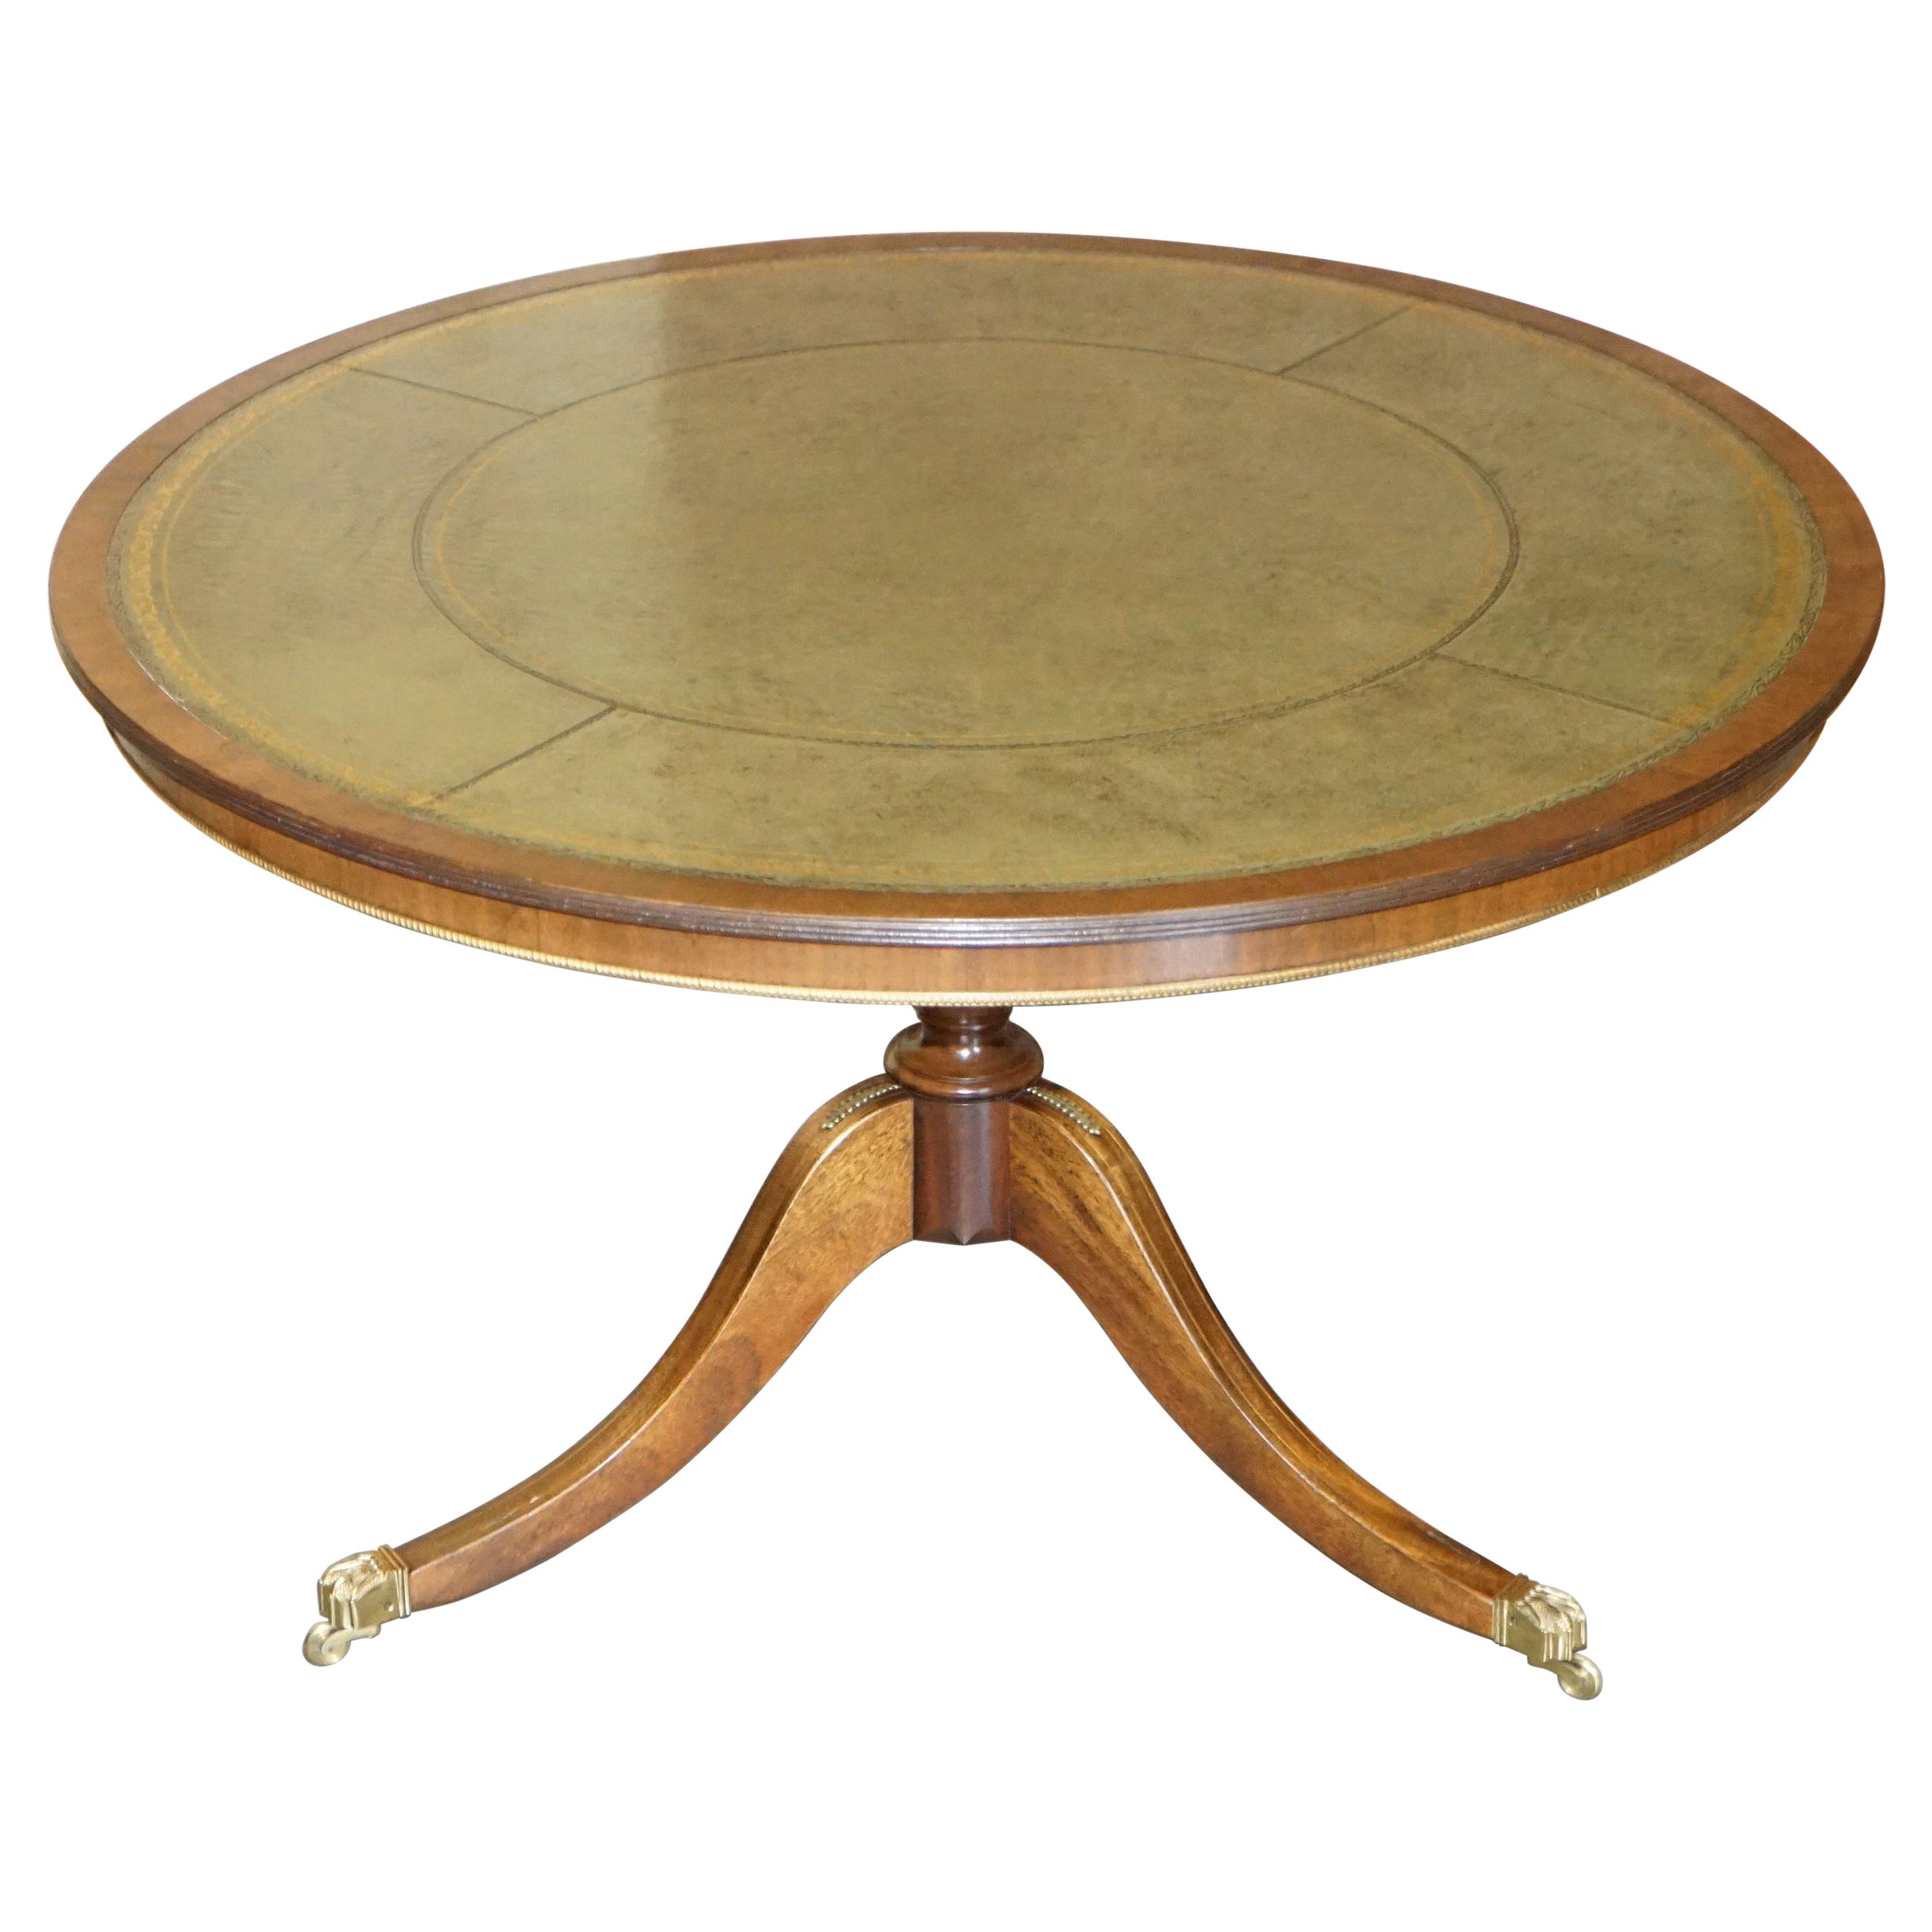 Luxury Flamed Hardwood Brass Inlaid, Leather Drum Table